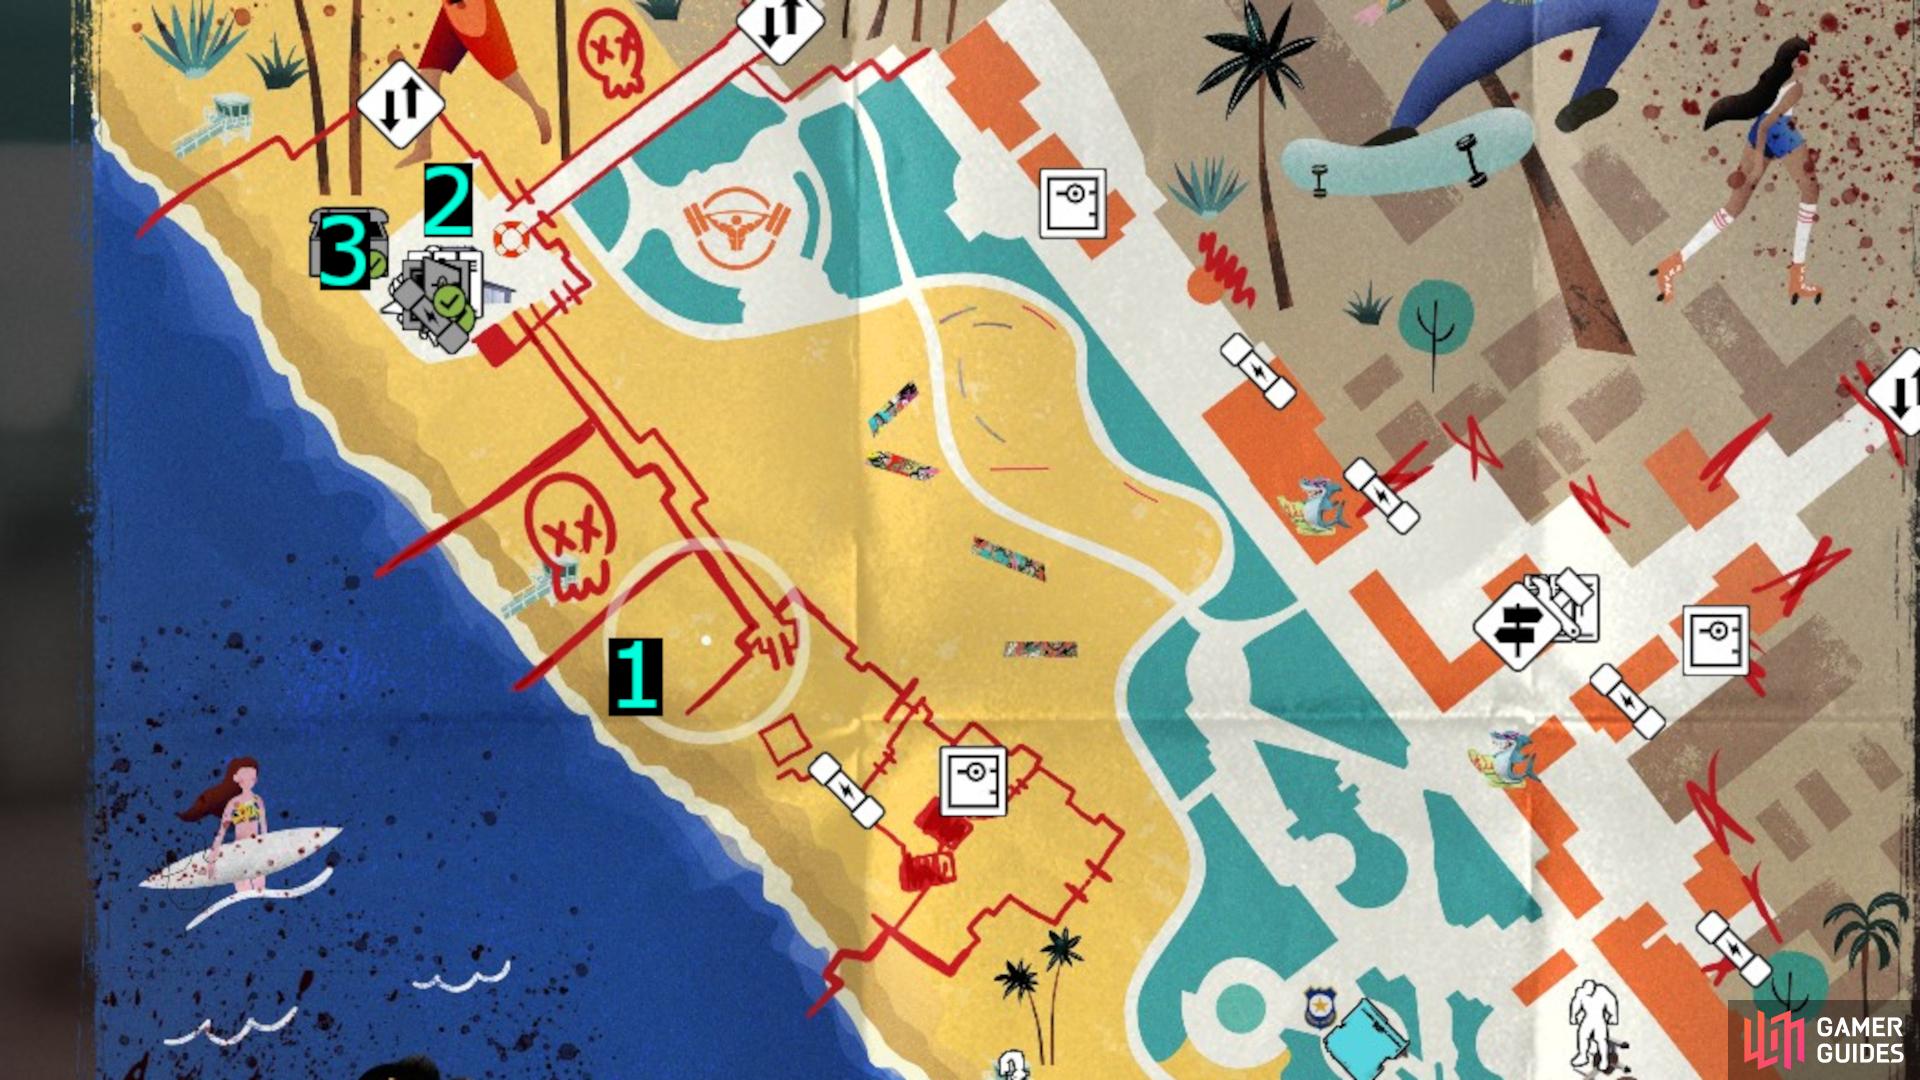 Here’s a map roughly outlining where to go for each step needed to complete the Dead Island 2 Redacated Lost and Found quest.